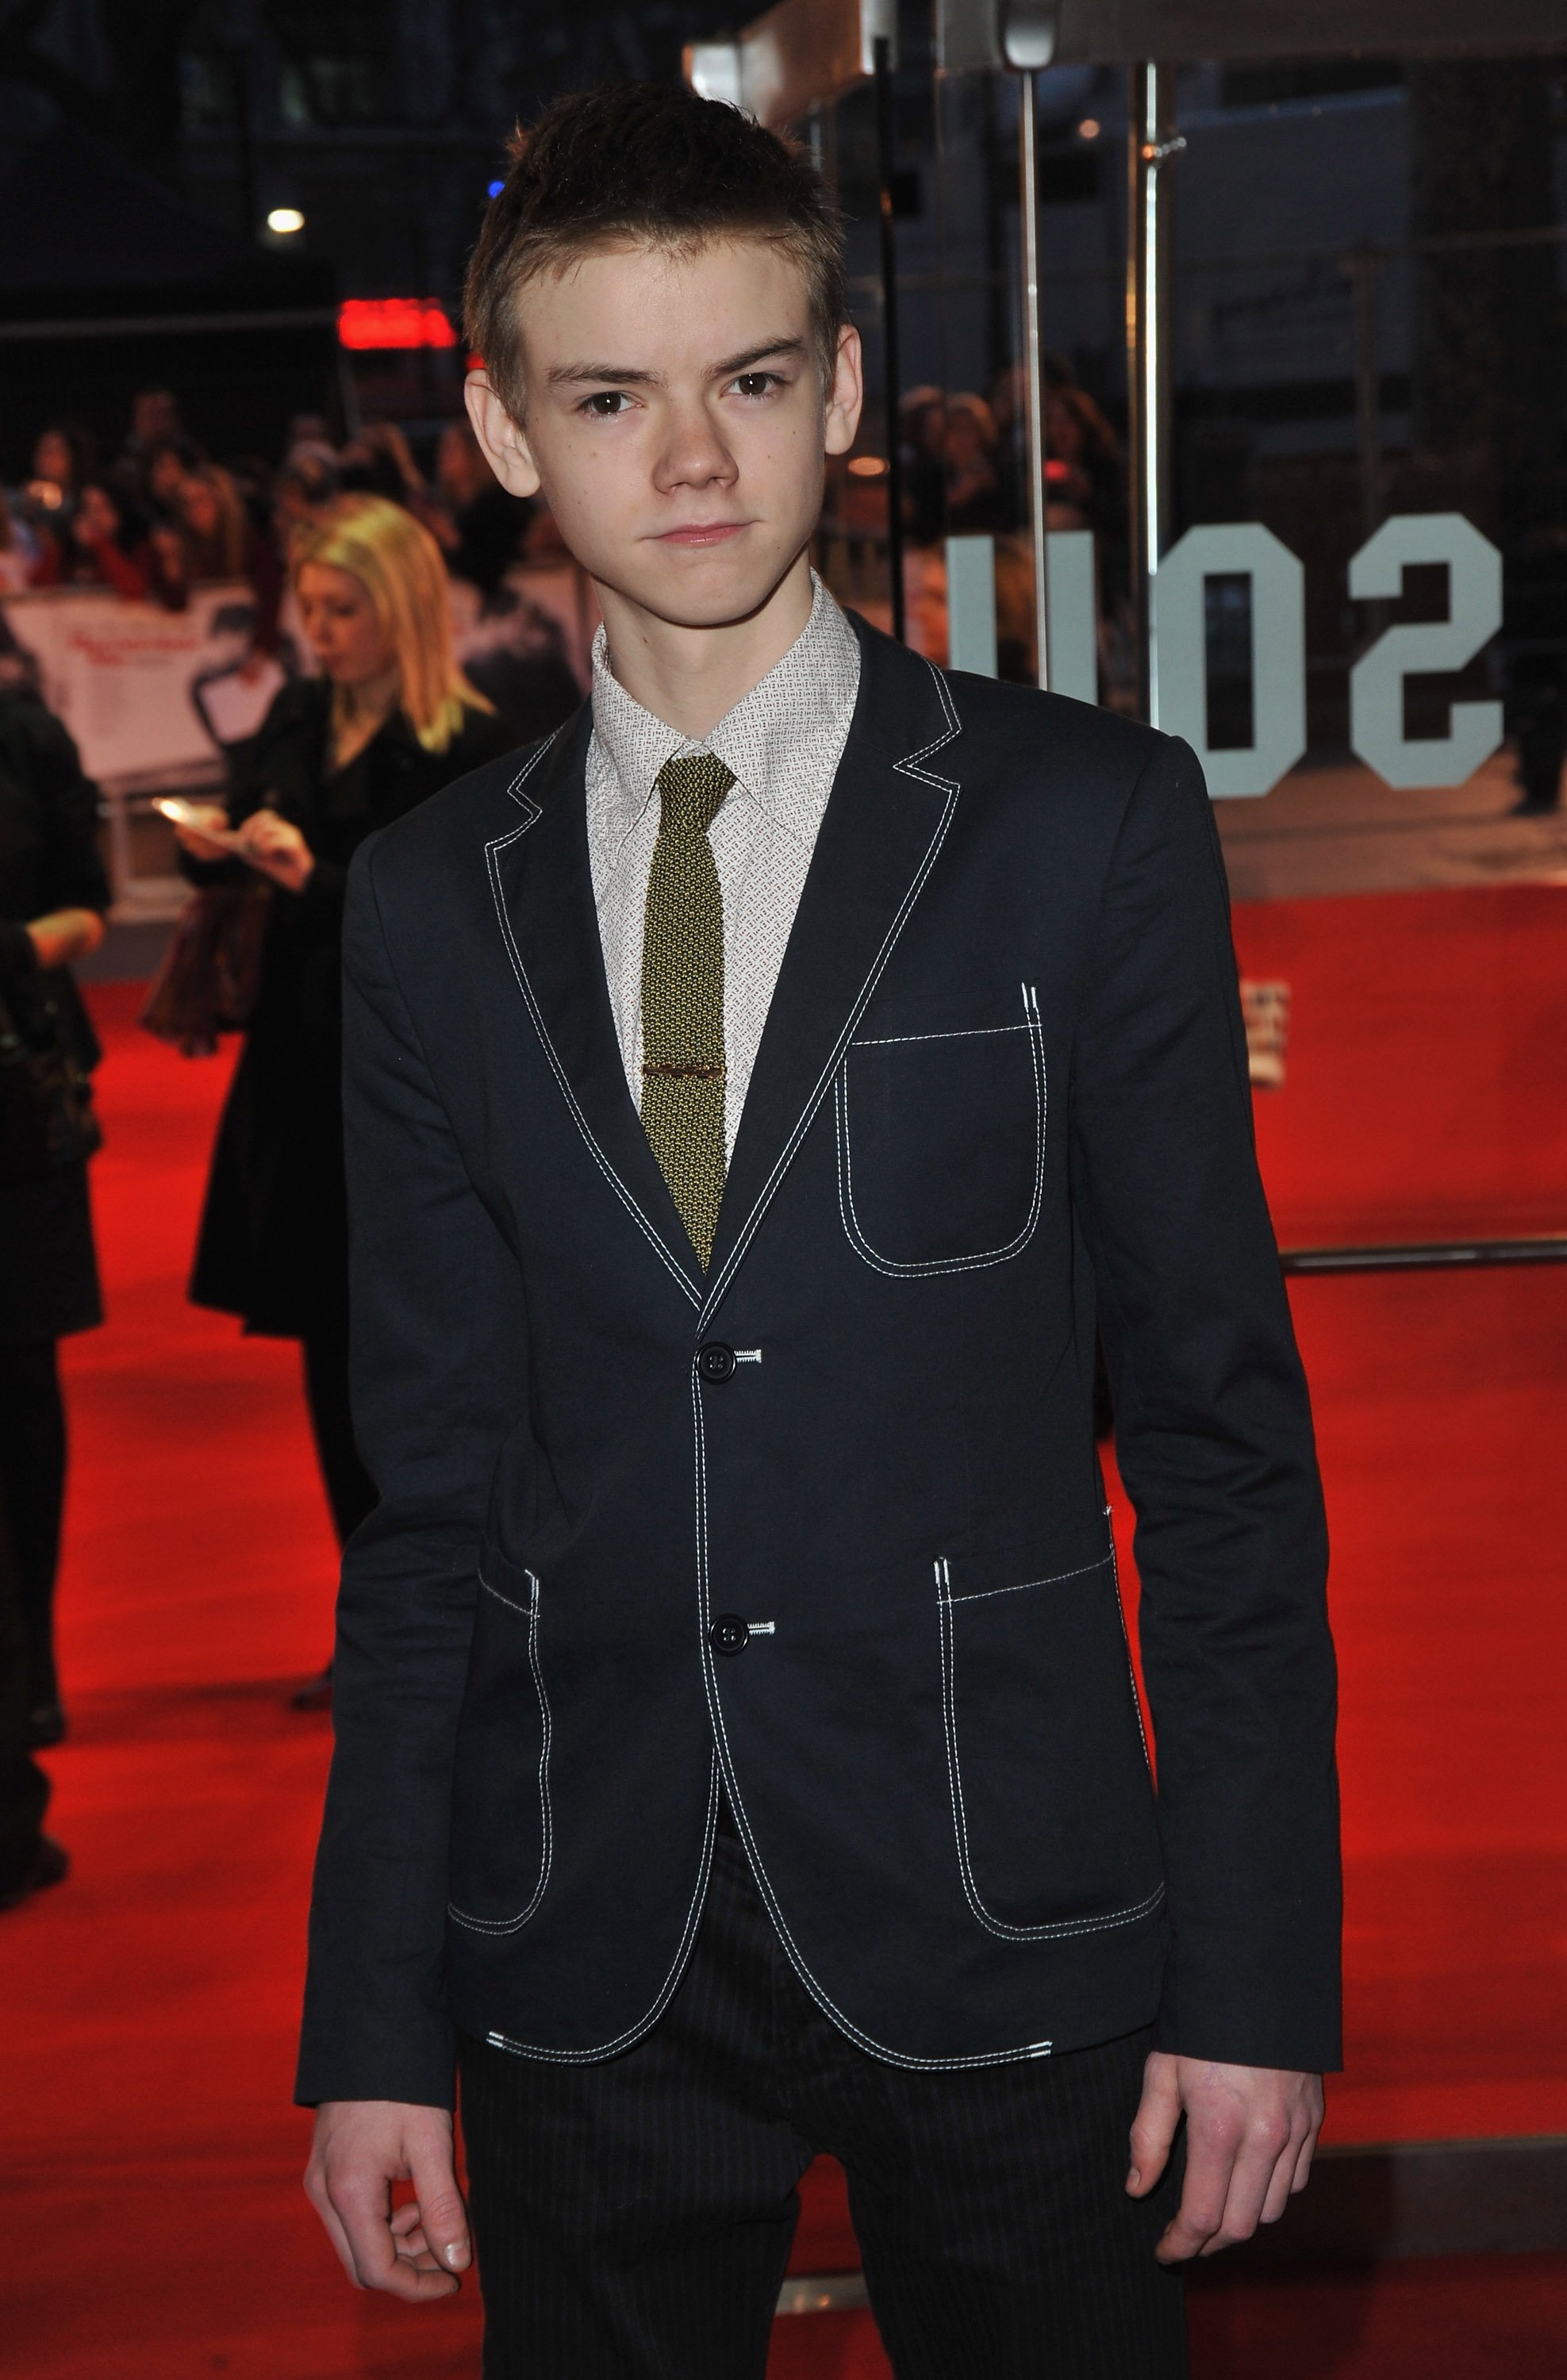 Thomas Sangster attends the 'Remember Me' film premiere at the Odeon Leicester Square on March 17, 2010 | Photo: Getty Images